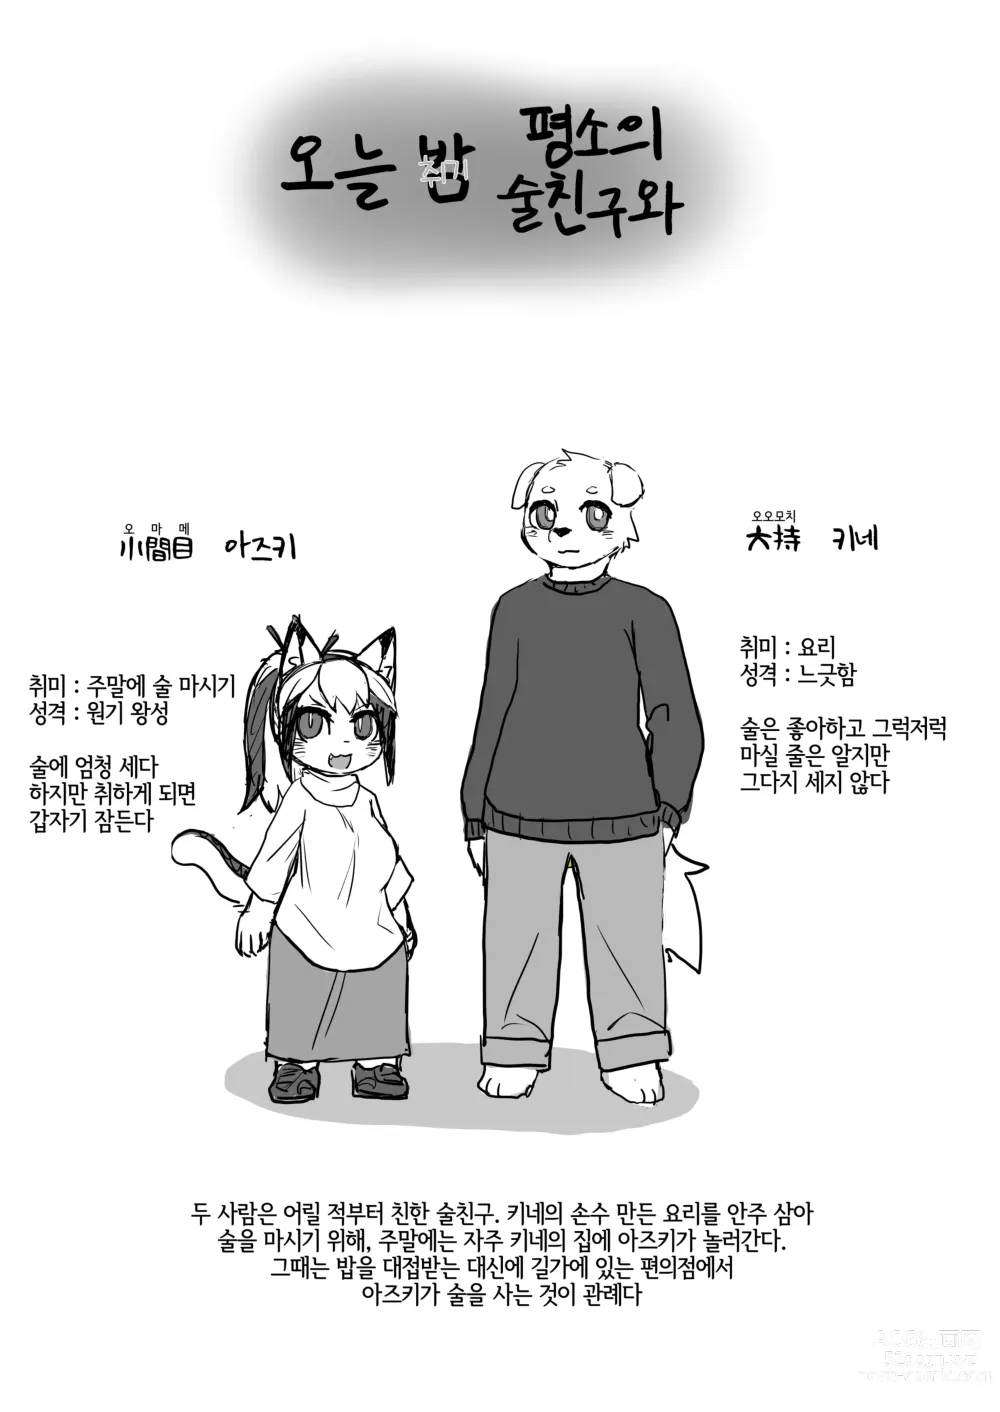 Page 2 of doujinshi 오늘 밤 평소의 술친구와